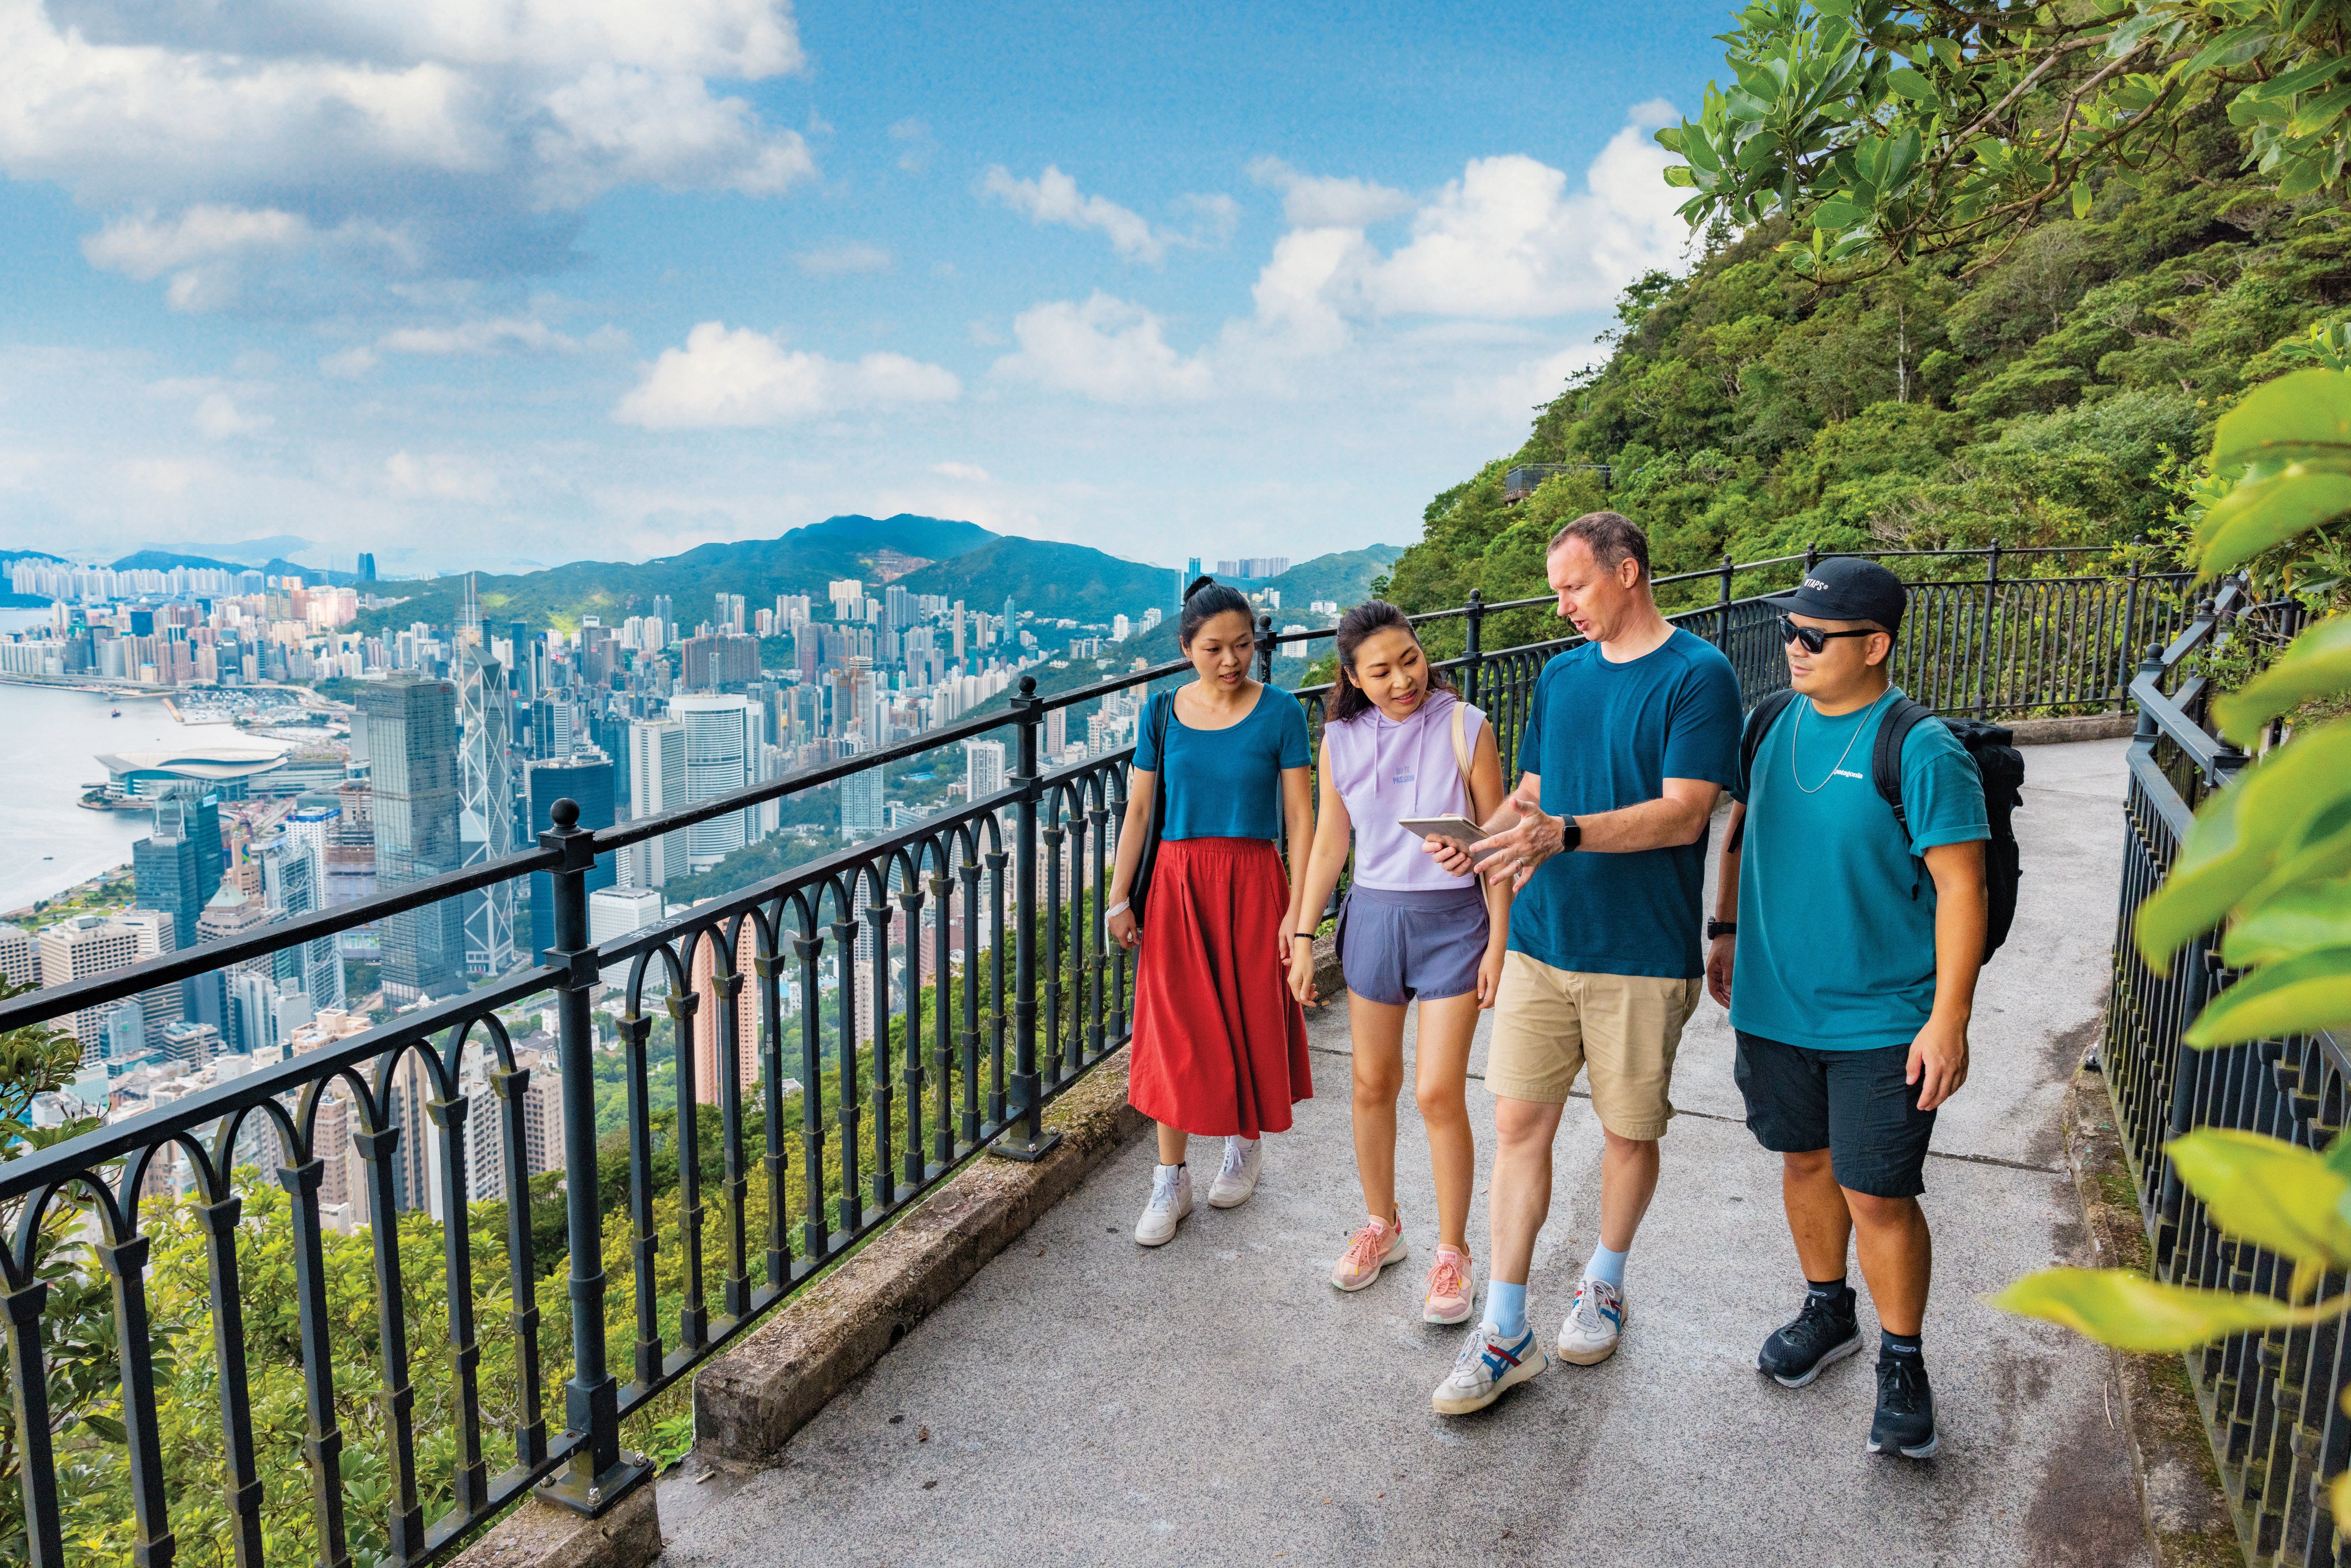 A hike along a tree-lined trail on The Peak – offering a spectacular bird’s-eye view of Hong Kong’s iconic, skyscraper-flanked Victoria Harbour – is among the great team-building activities available to incentive groups.